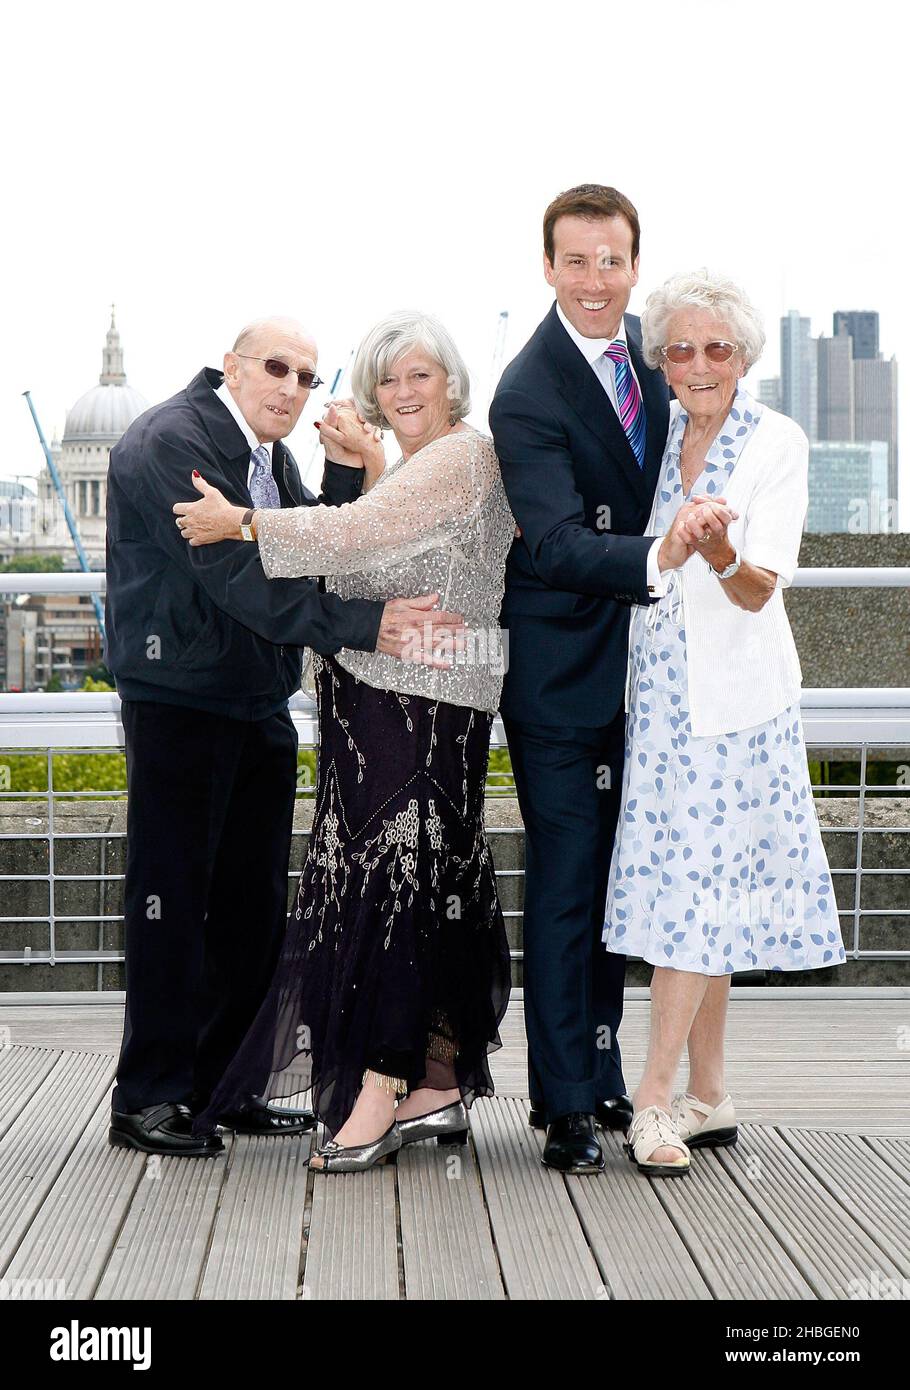 Ann Widdecombe and Anton du Beke take a turn with care home residents Clifford Morgan, 84, and Eliza Evans, 92, to launch Bupa's Shall We Dance campaign, highlighting the health benefits of dancing to over 75s, at the National Theatre, South Bank, London. The campaign is calling for communities to contact their local care home to help get 30,000 people dancing in June after a Bupa report highlighted how dance can help improve mental and physical wellbeing and aid in the treatment of conditions like dementia and Parkinson's. Stock Photo